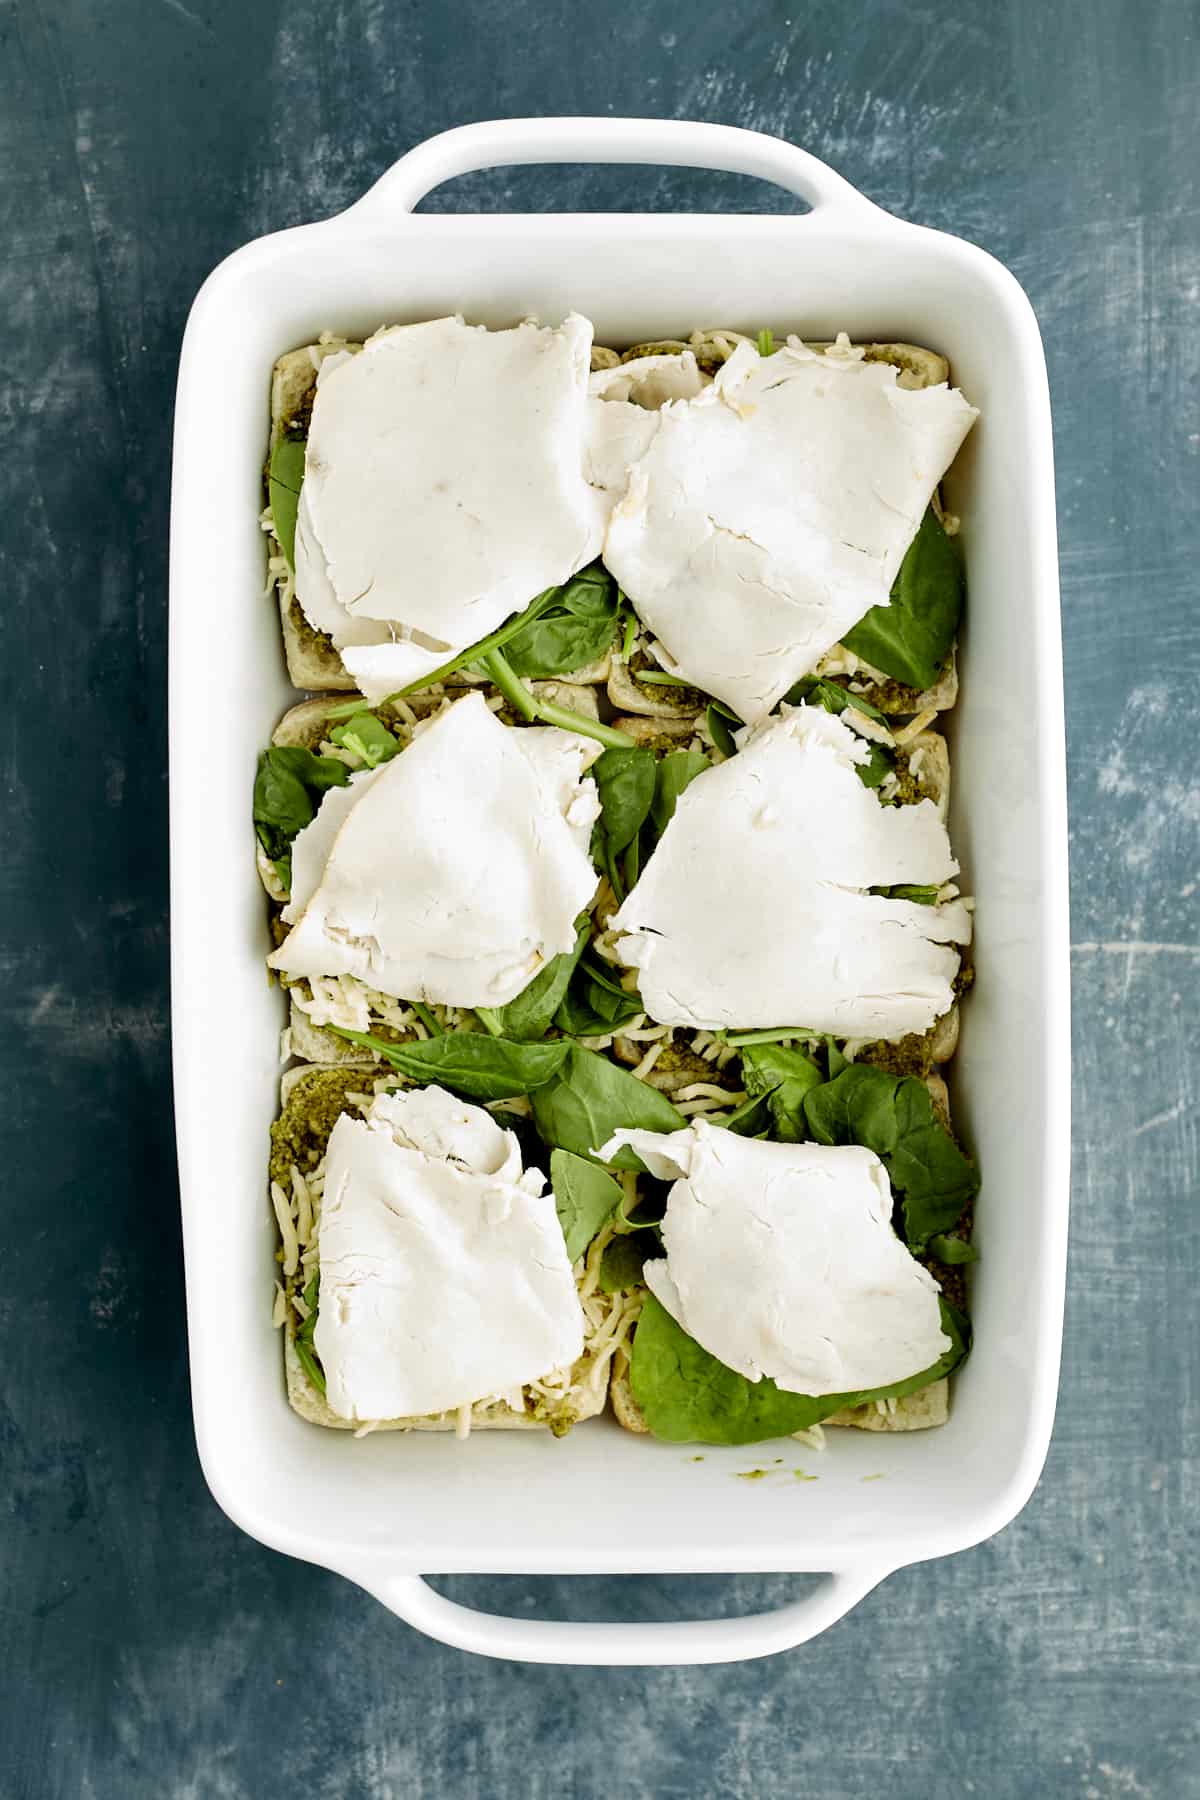 sliced ciabatta buns in a white baking dish layered with pesto, spinach, and turkey.